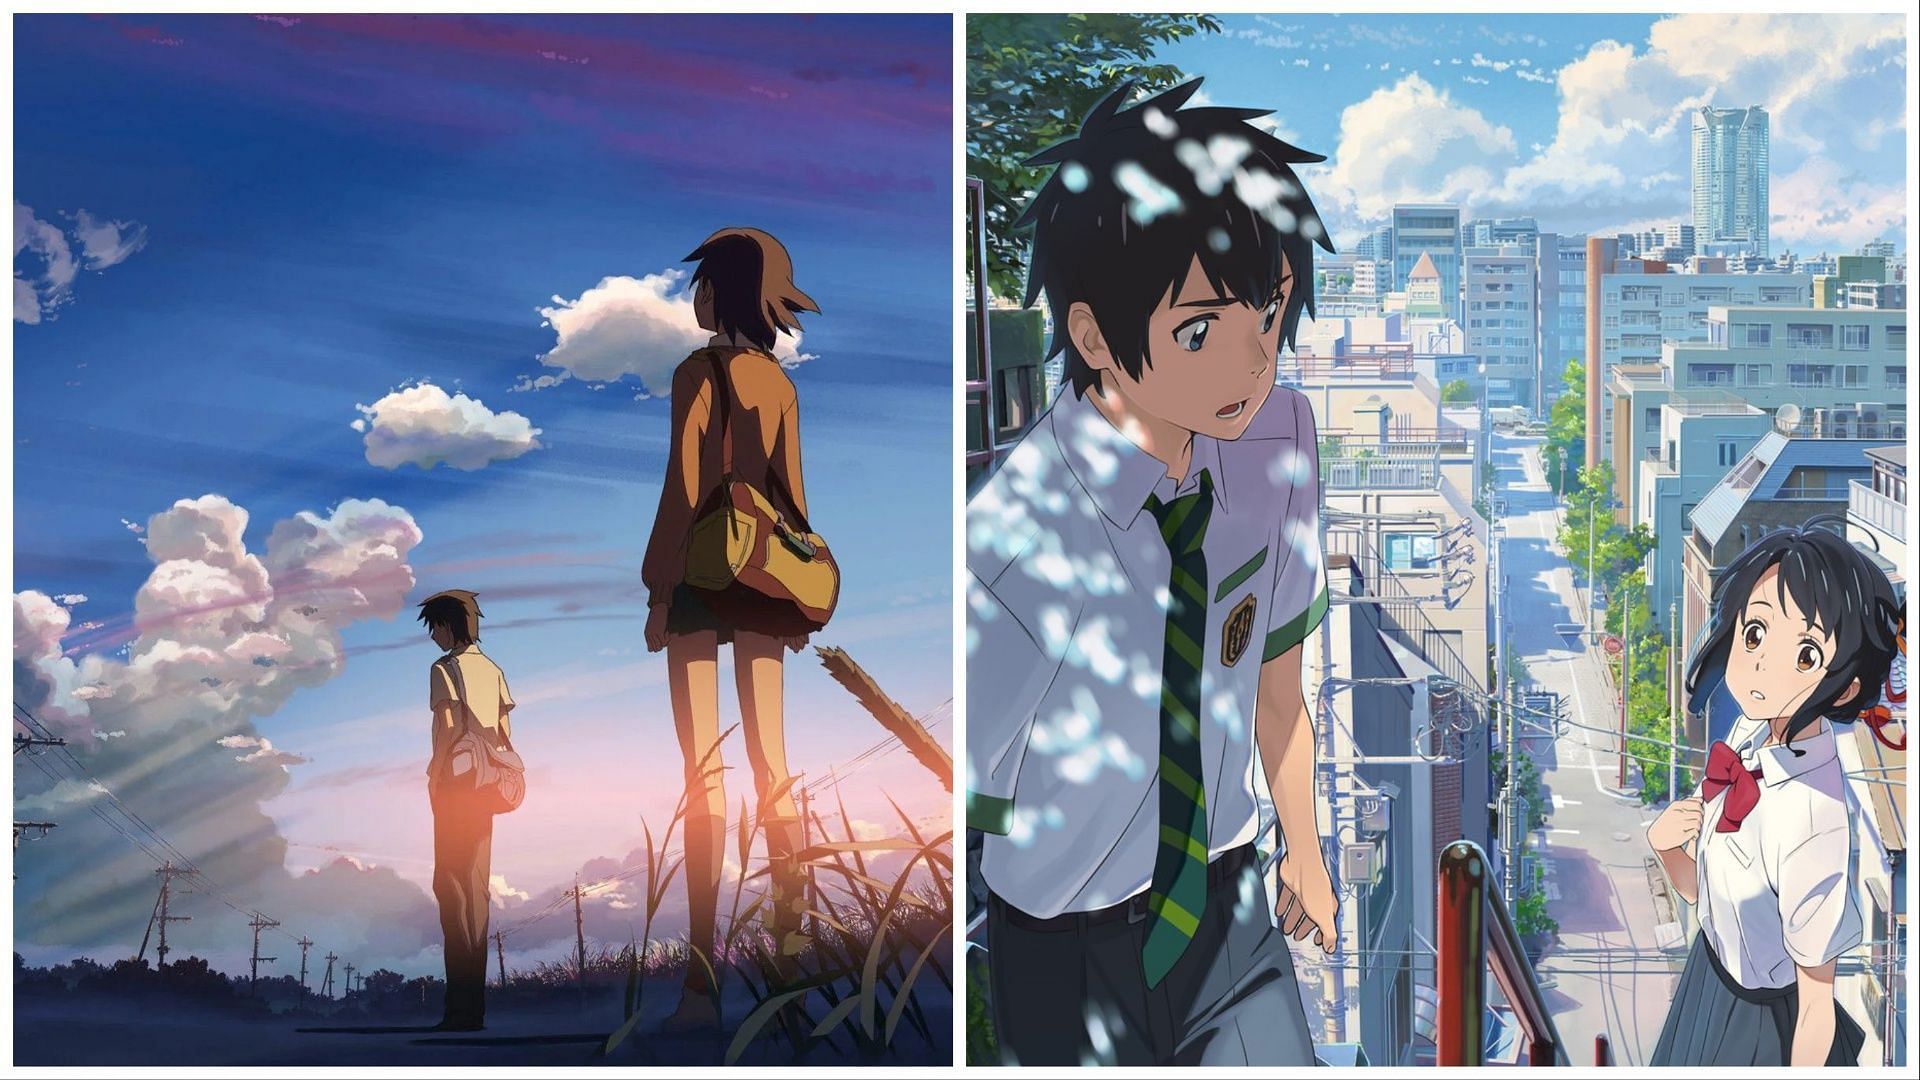 Makoto Shinkai Film Festival in India: List of cities, films, and reactions